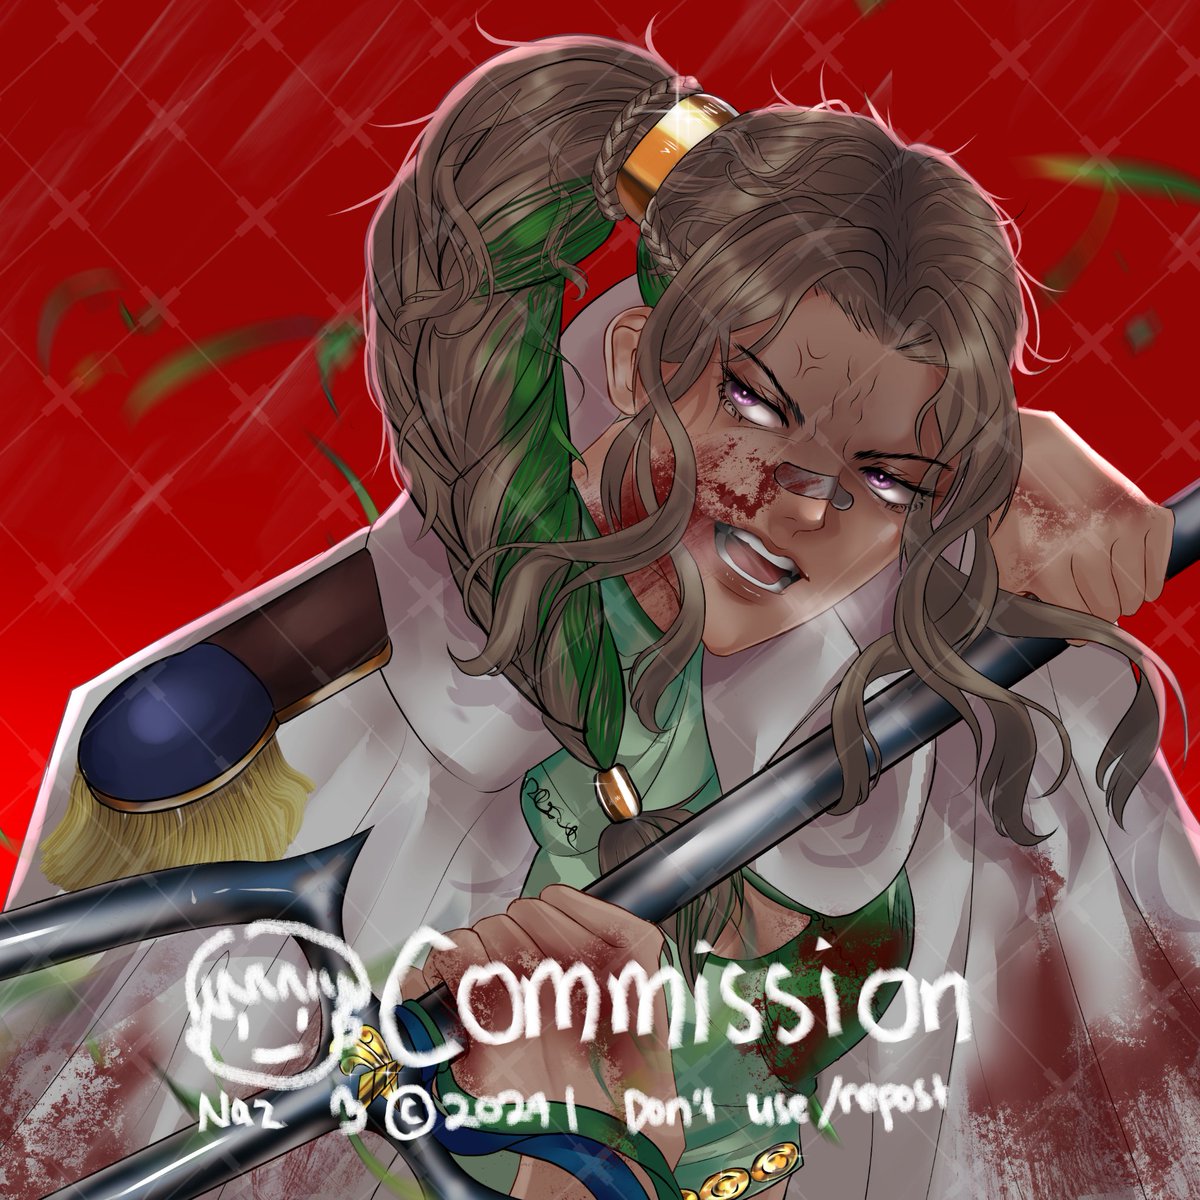 Commission for @/kiyoova
Thank you so much for commissioning me!! My commission is still open. Kindly DM me if you're interested 🫶

#VGen #commissionopen #VGenComm #artidn #zonakaryaid  #artistindonesia